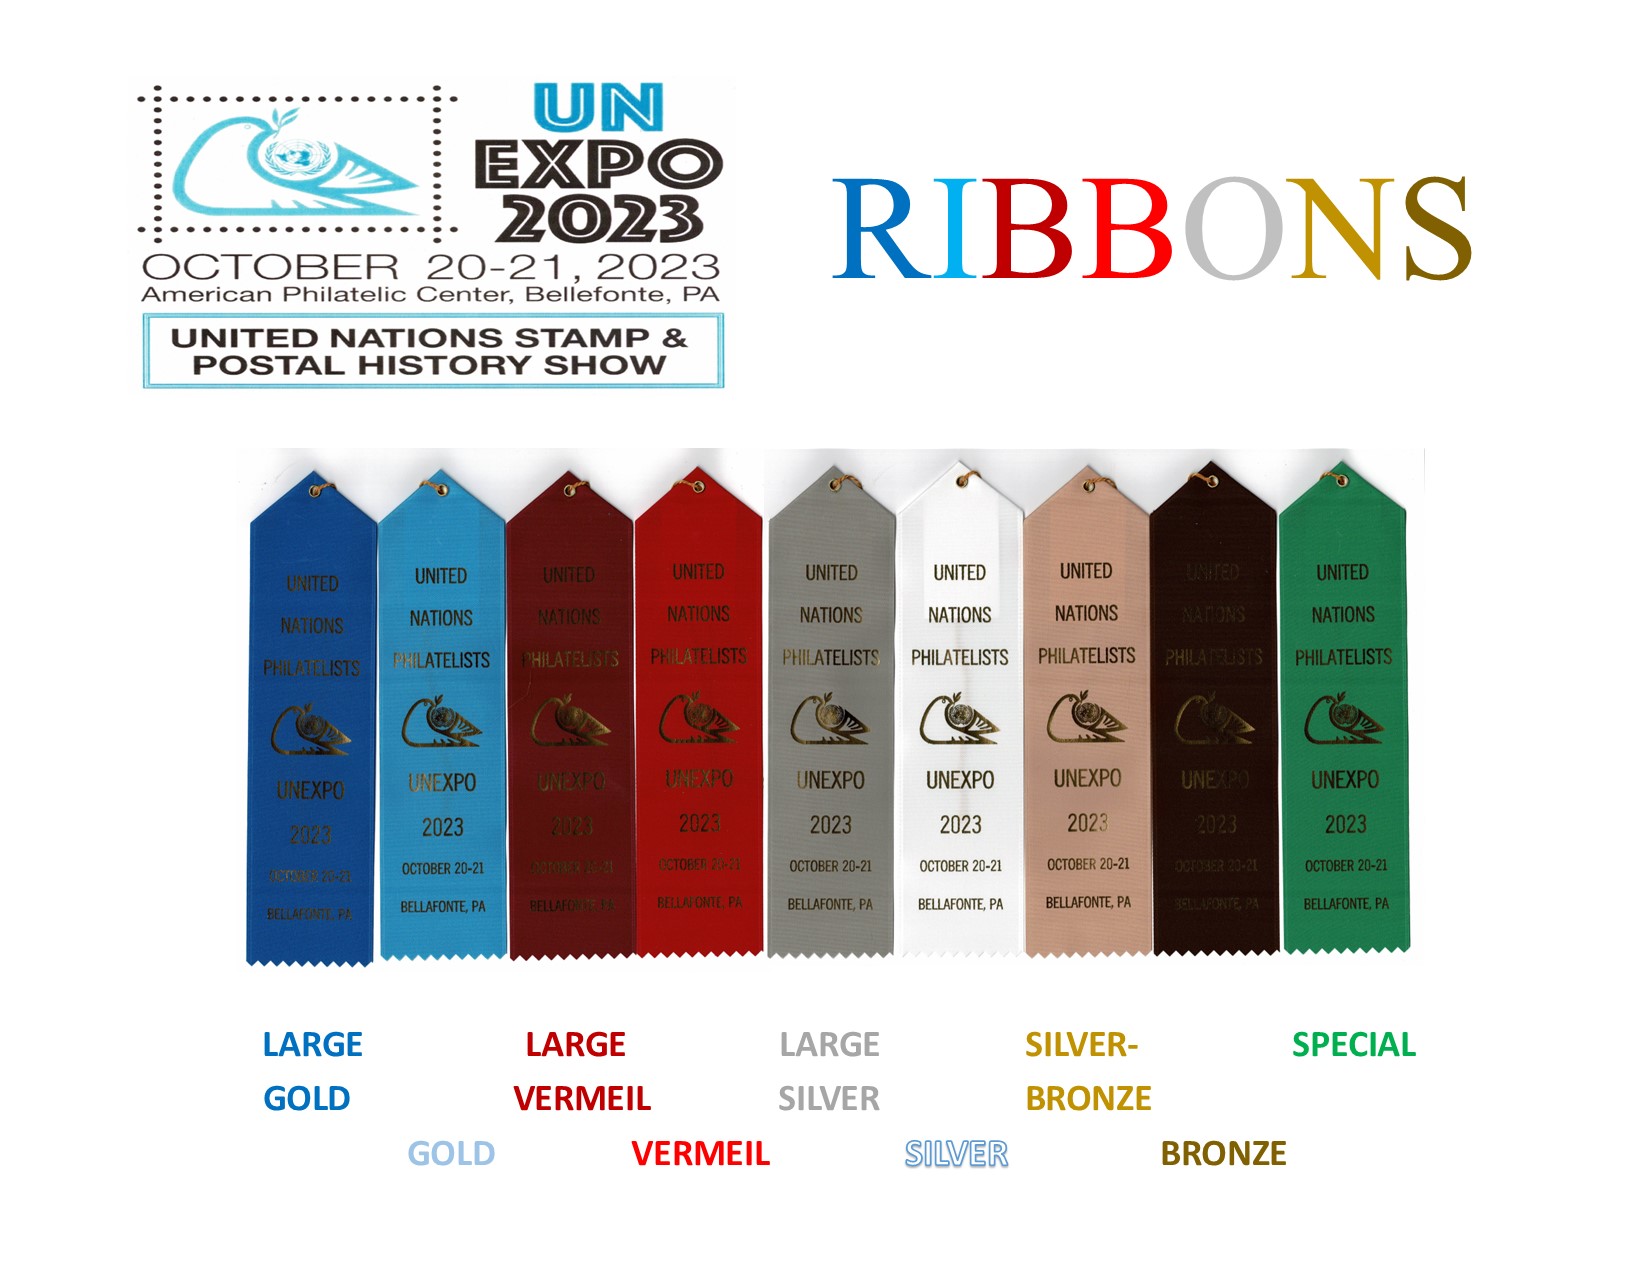 Ribbons for Large Gold, Gold, Large Vermeil, Vermeil, Large Silver, Silver, Silver Bronze and Bronze